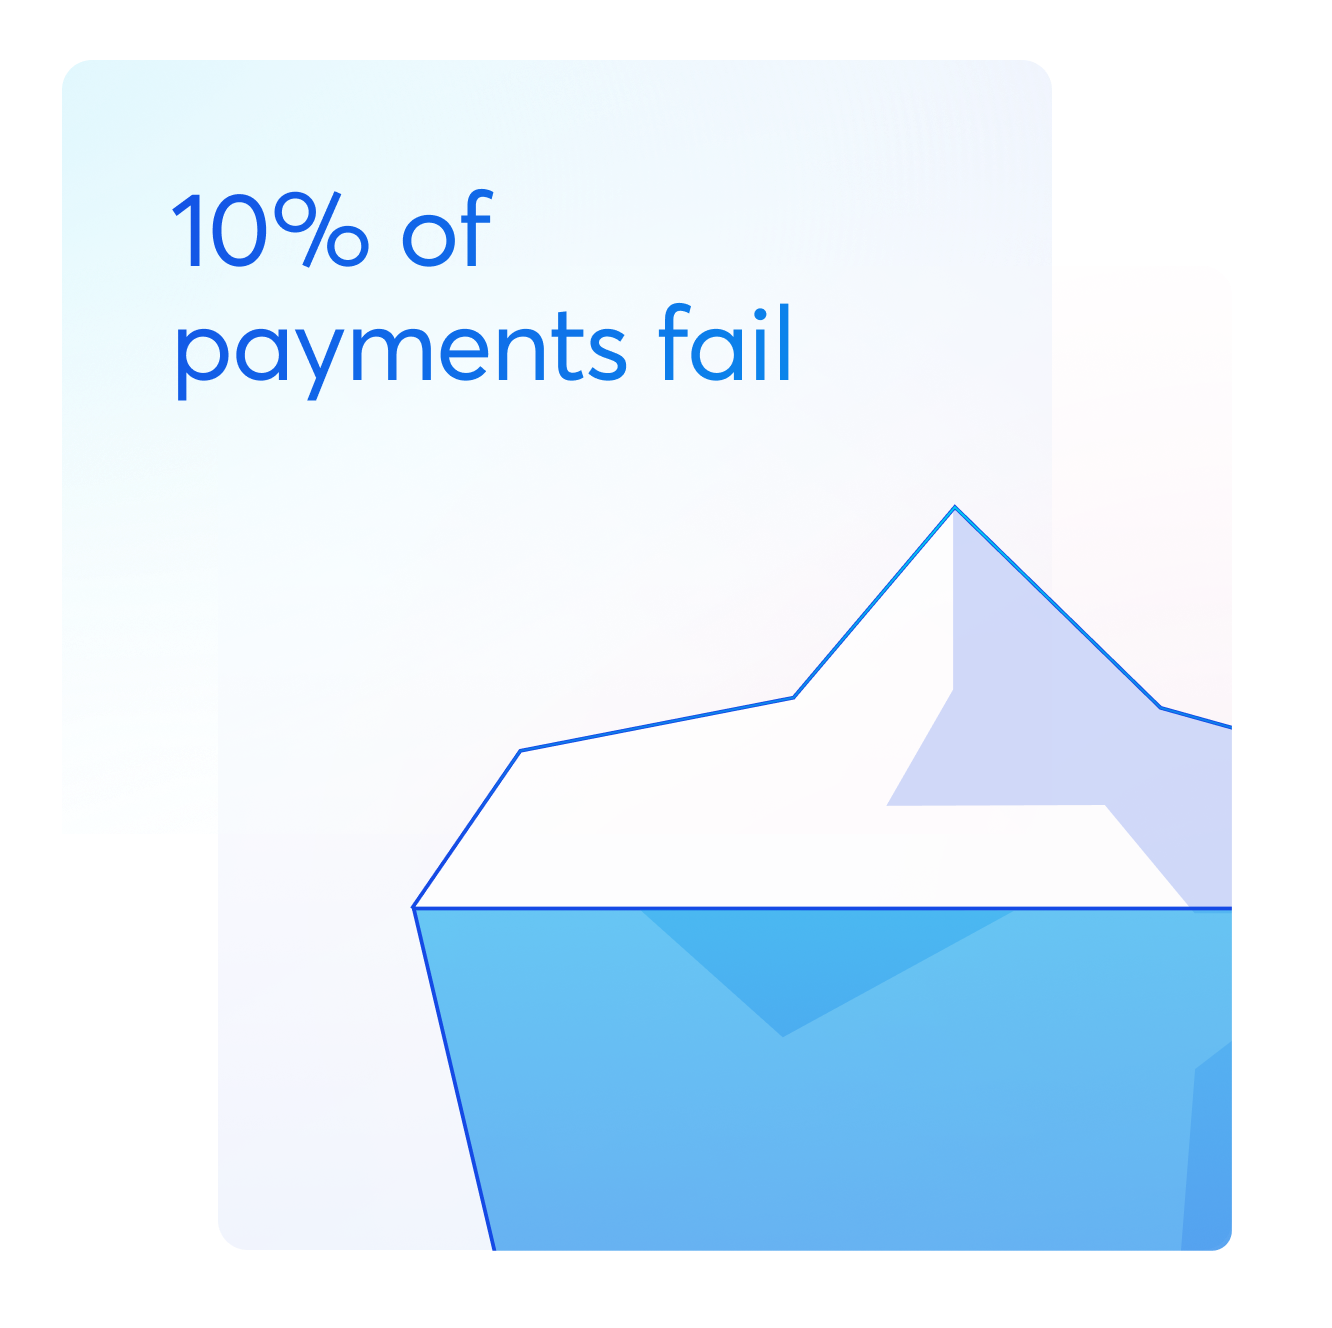 Payment failure costs more than you think